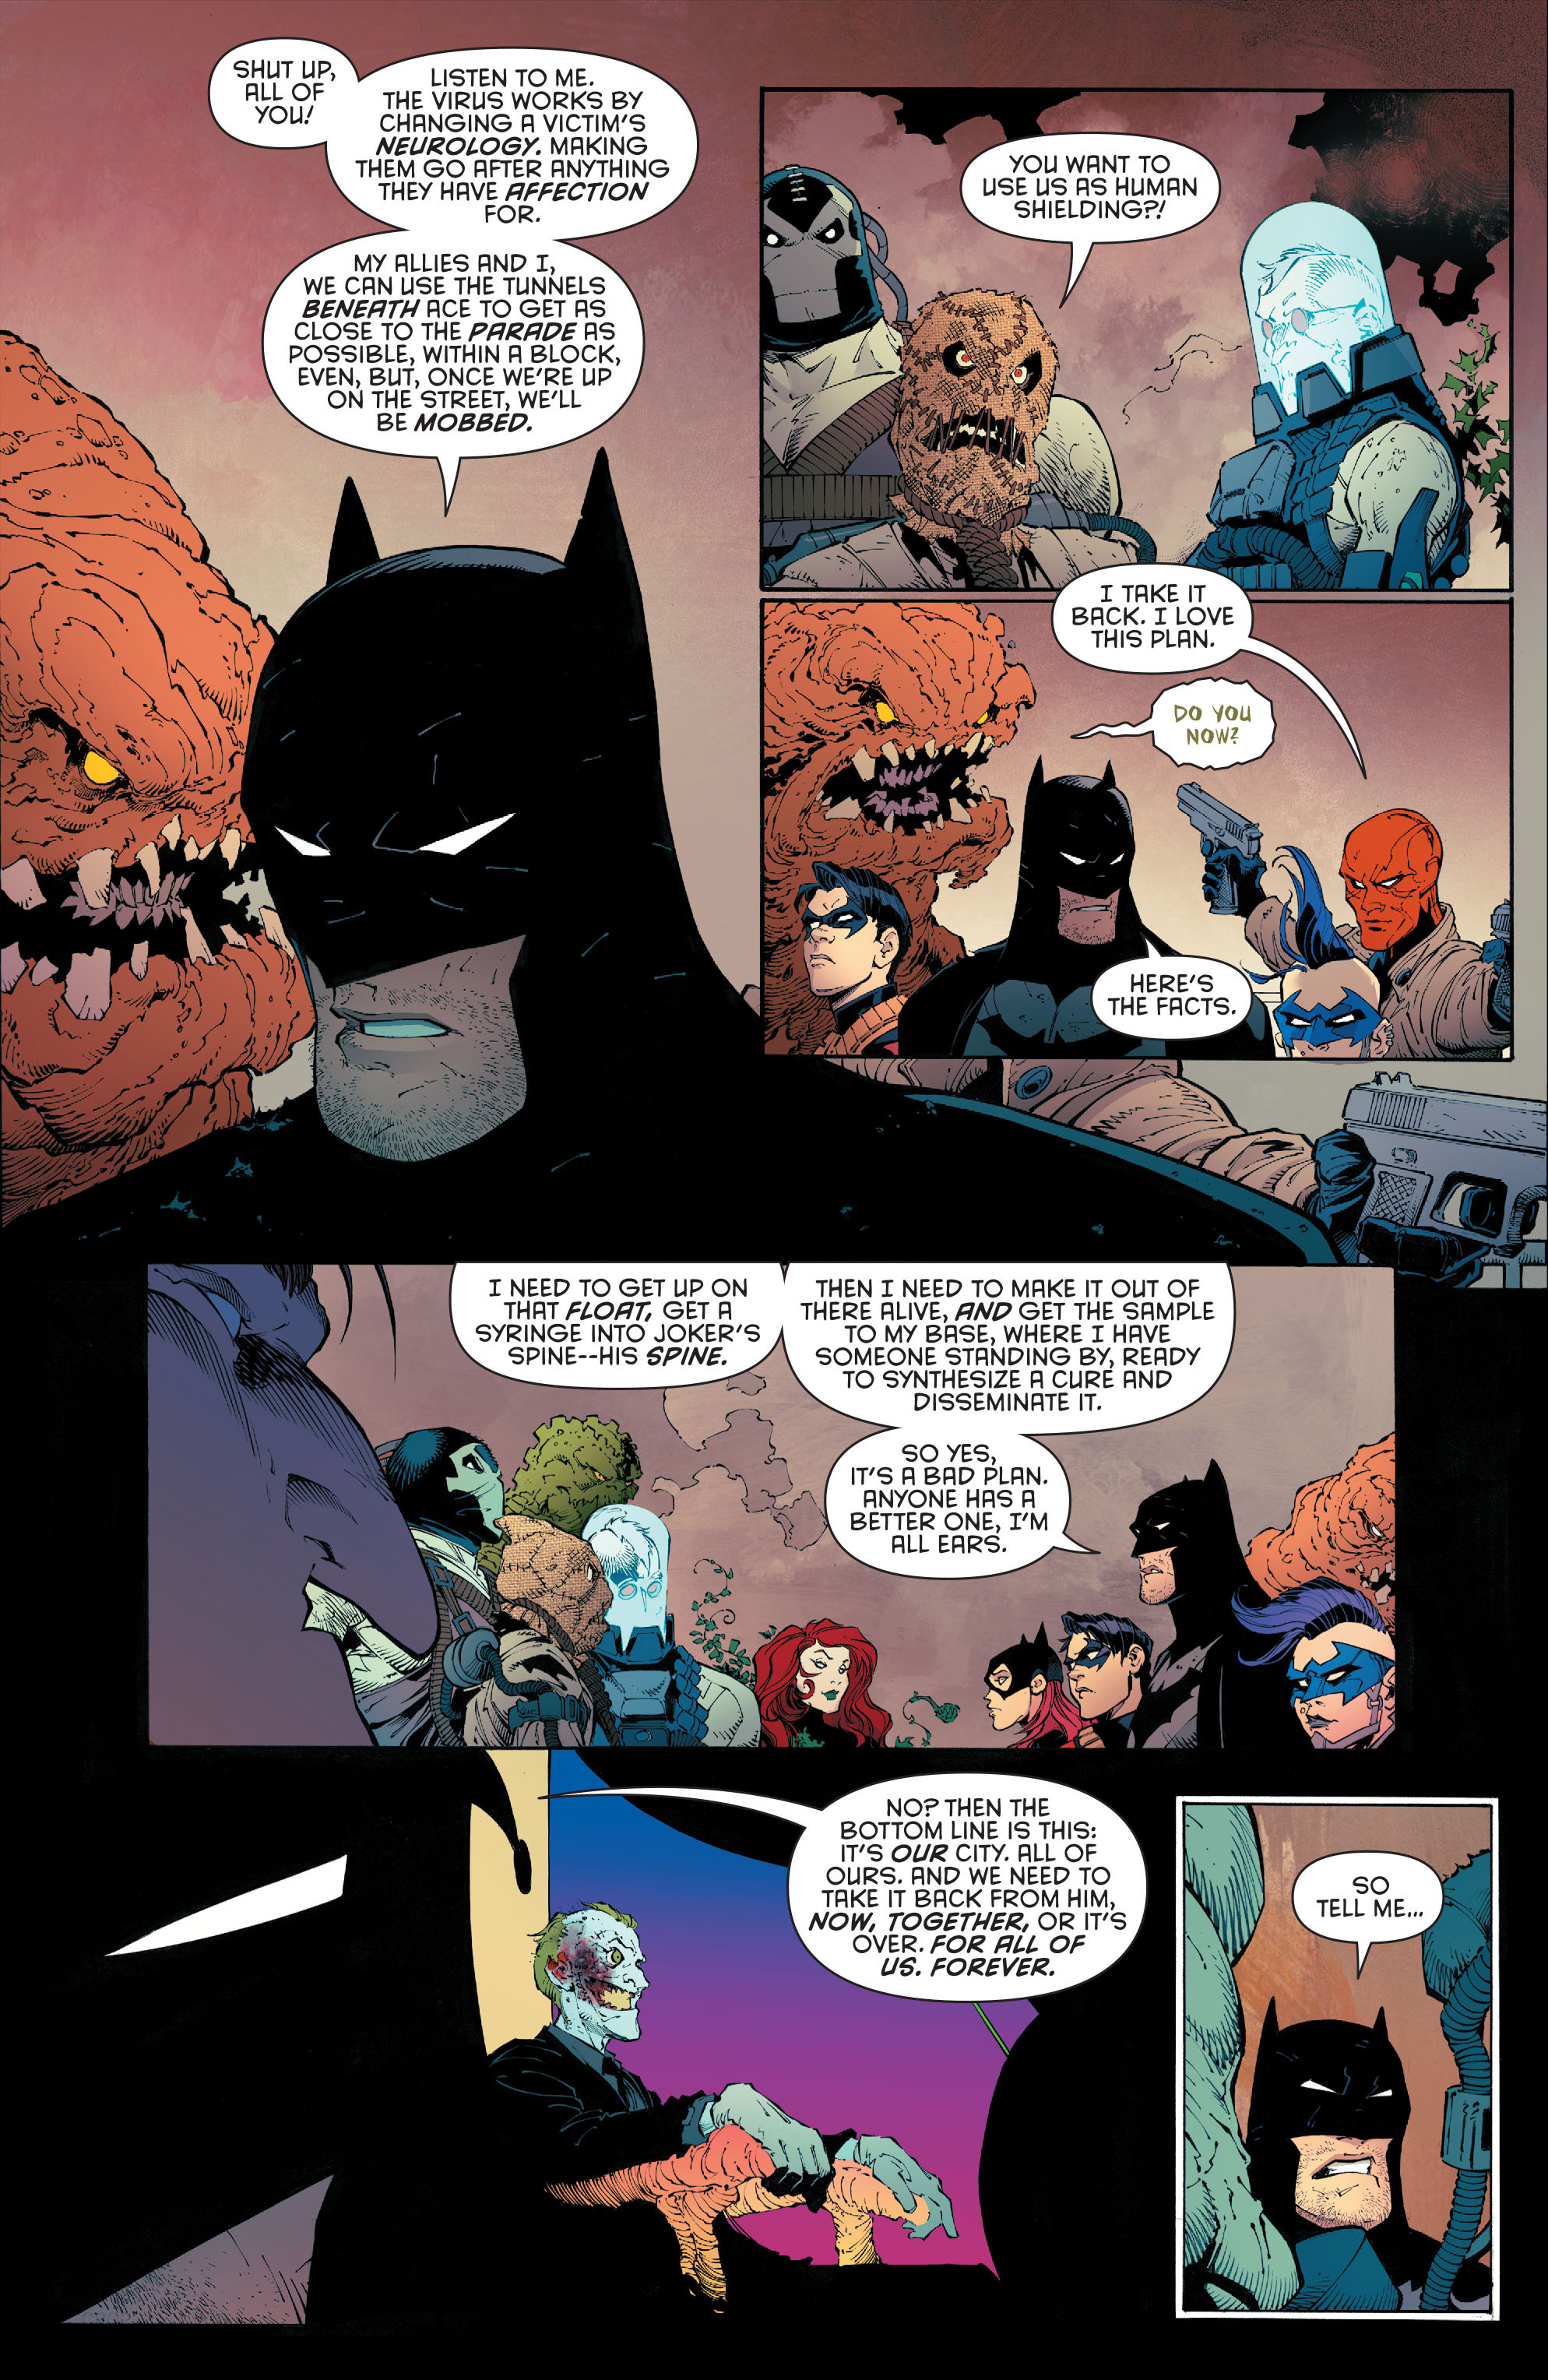 Batman 2011 Issue 39 | Read Batman 2011 Issue 39 comic online in high  quality. Read Full Comic online for free - Read comics online in high  quality .|